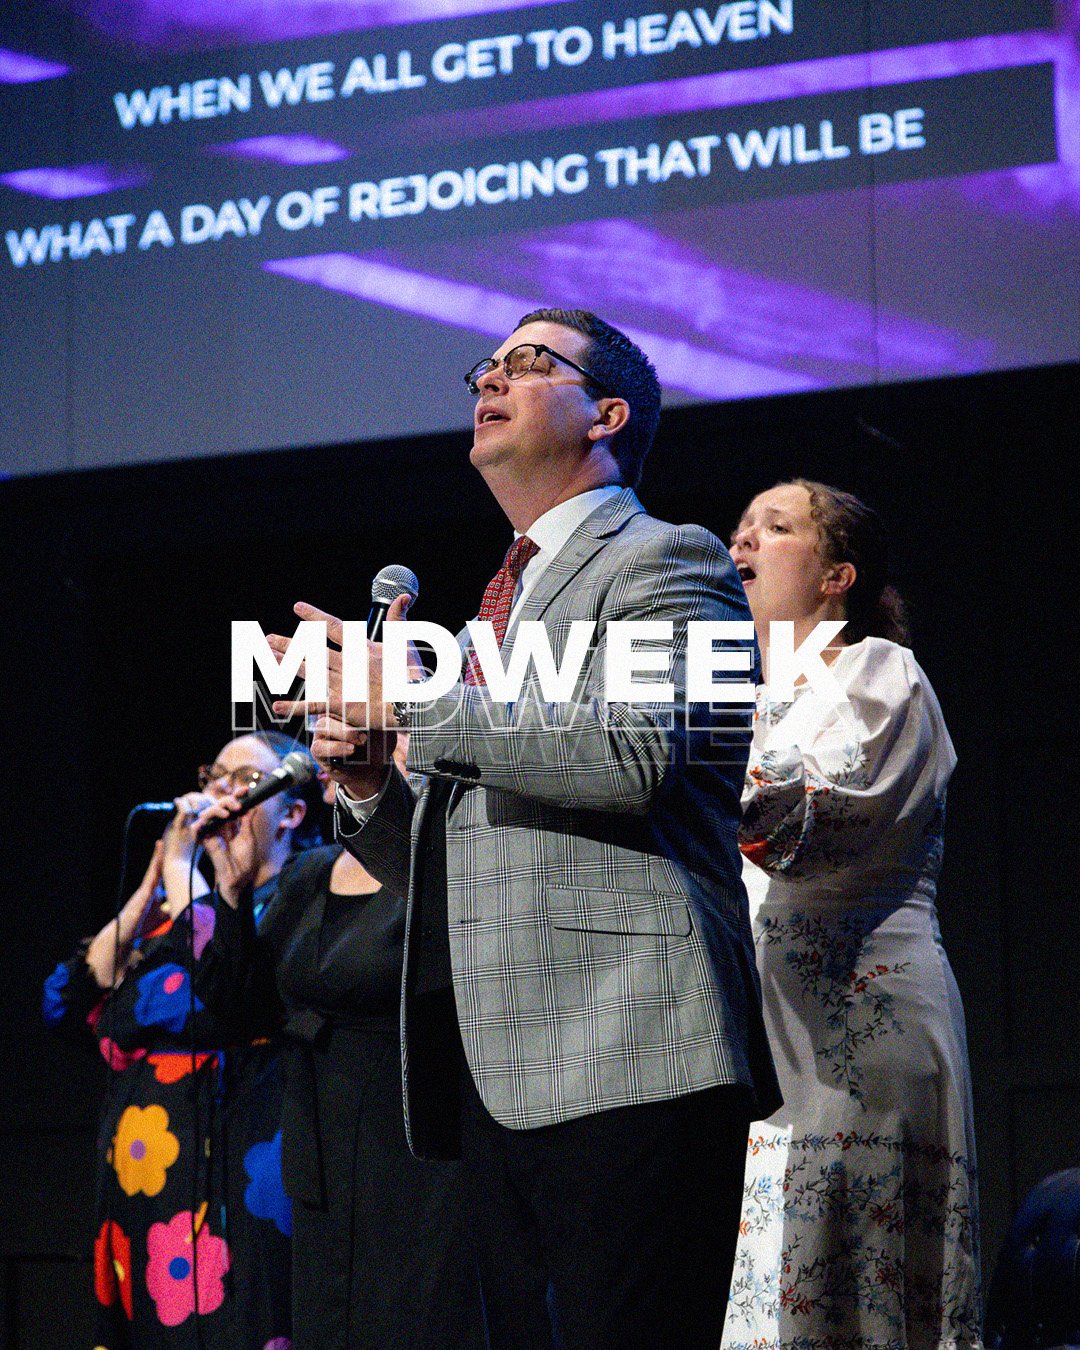 It's MIDWEEK time at FPC! See you tonight at 7 🙌

#FPCAnderson #MidweekMatters